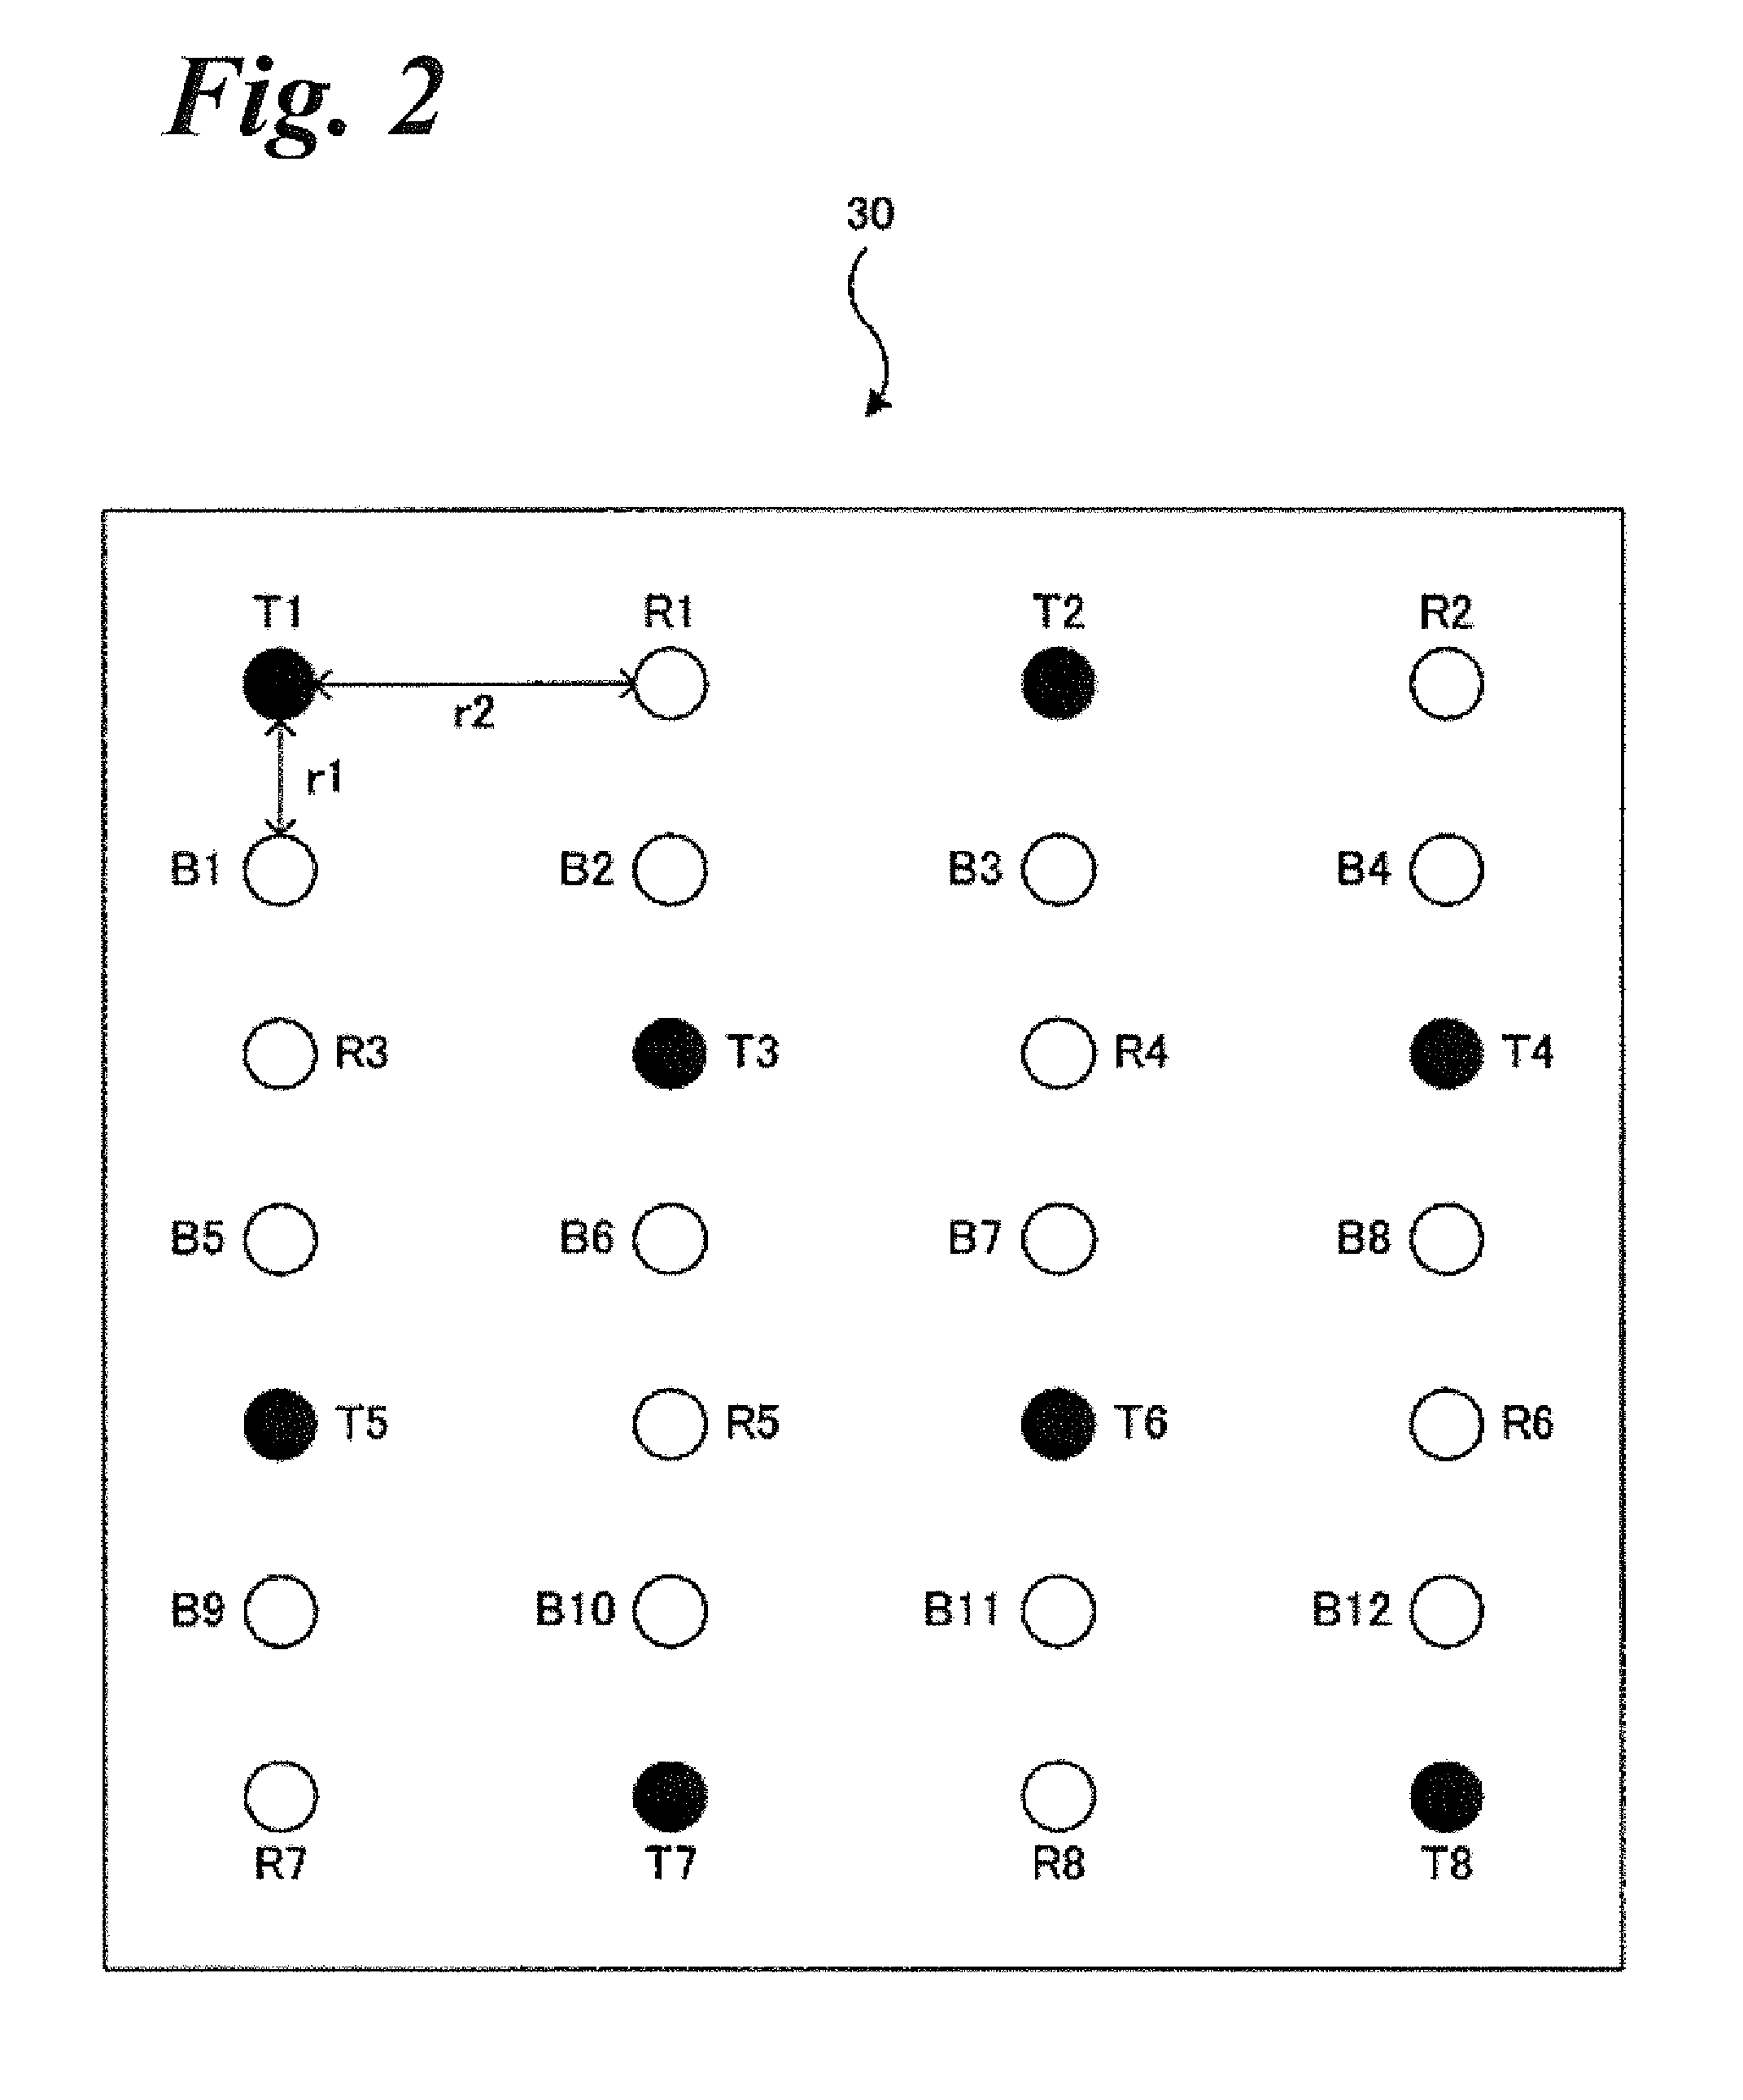 Optical biological measurement device and analysis method using the same